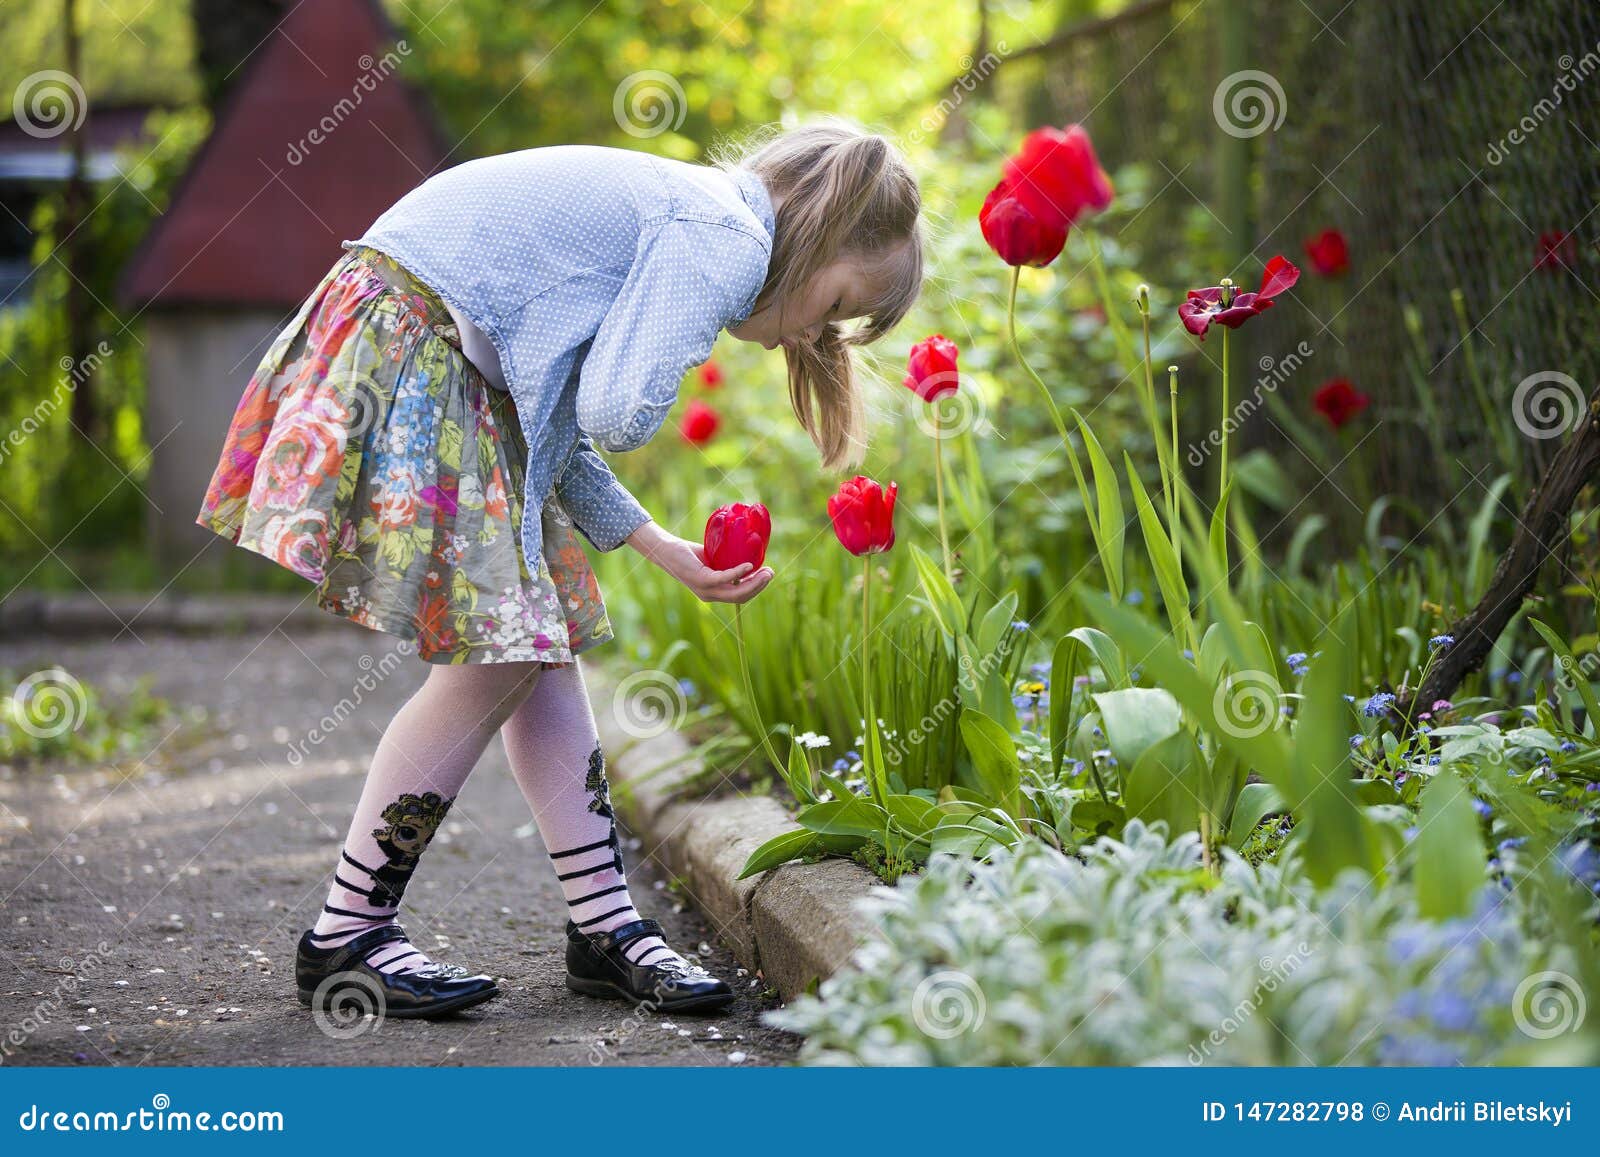 Profile of Cute Pretty Child Girl Outdoor at Flower Bed Looking at ...